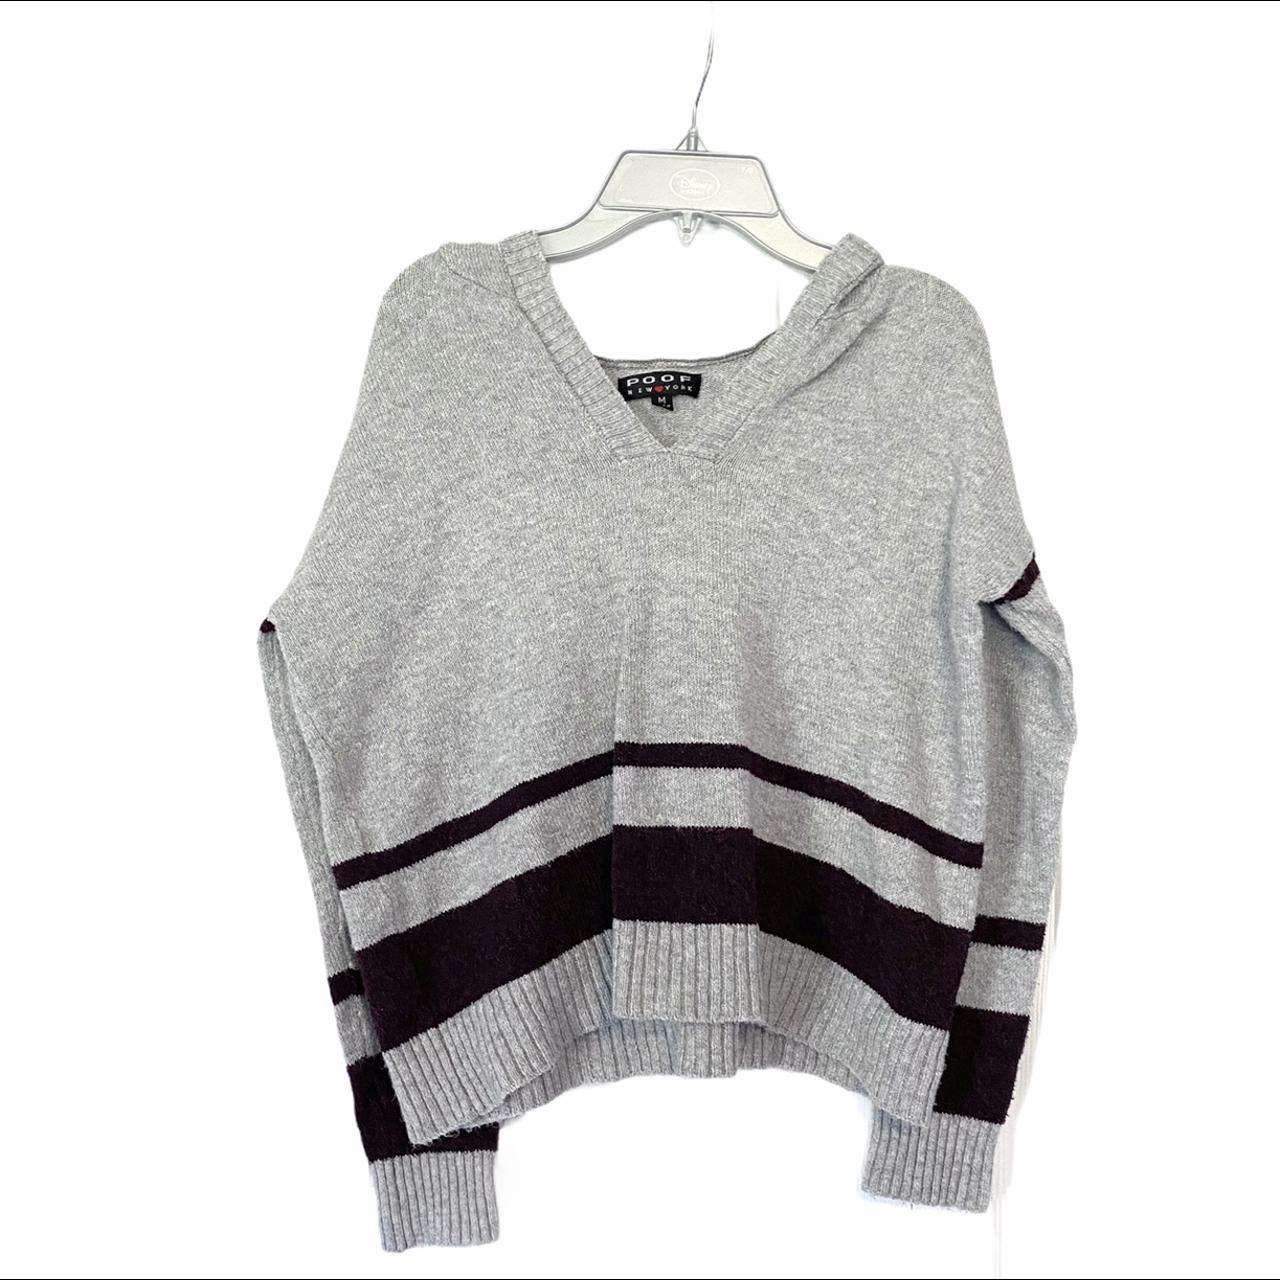 Product Image 2 - This is a sweater from